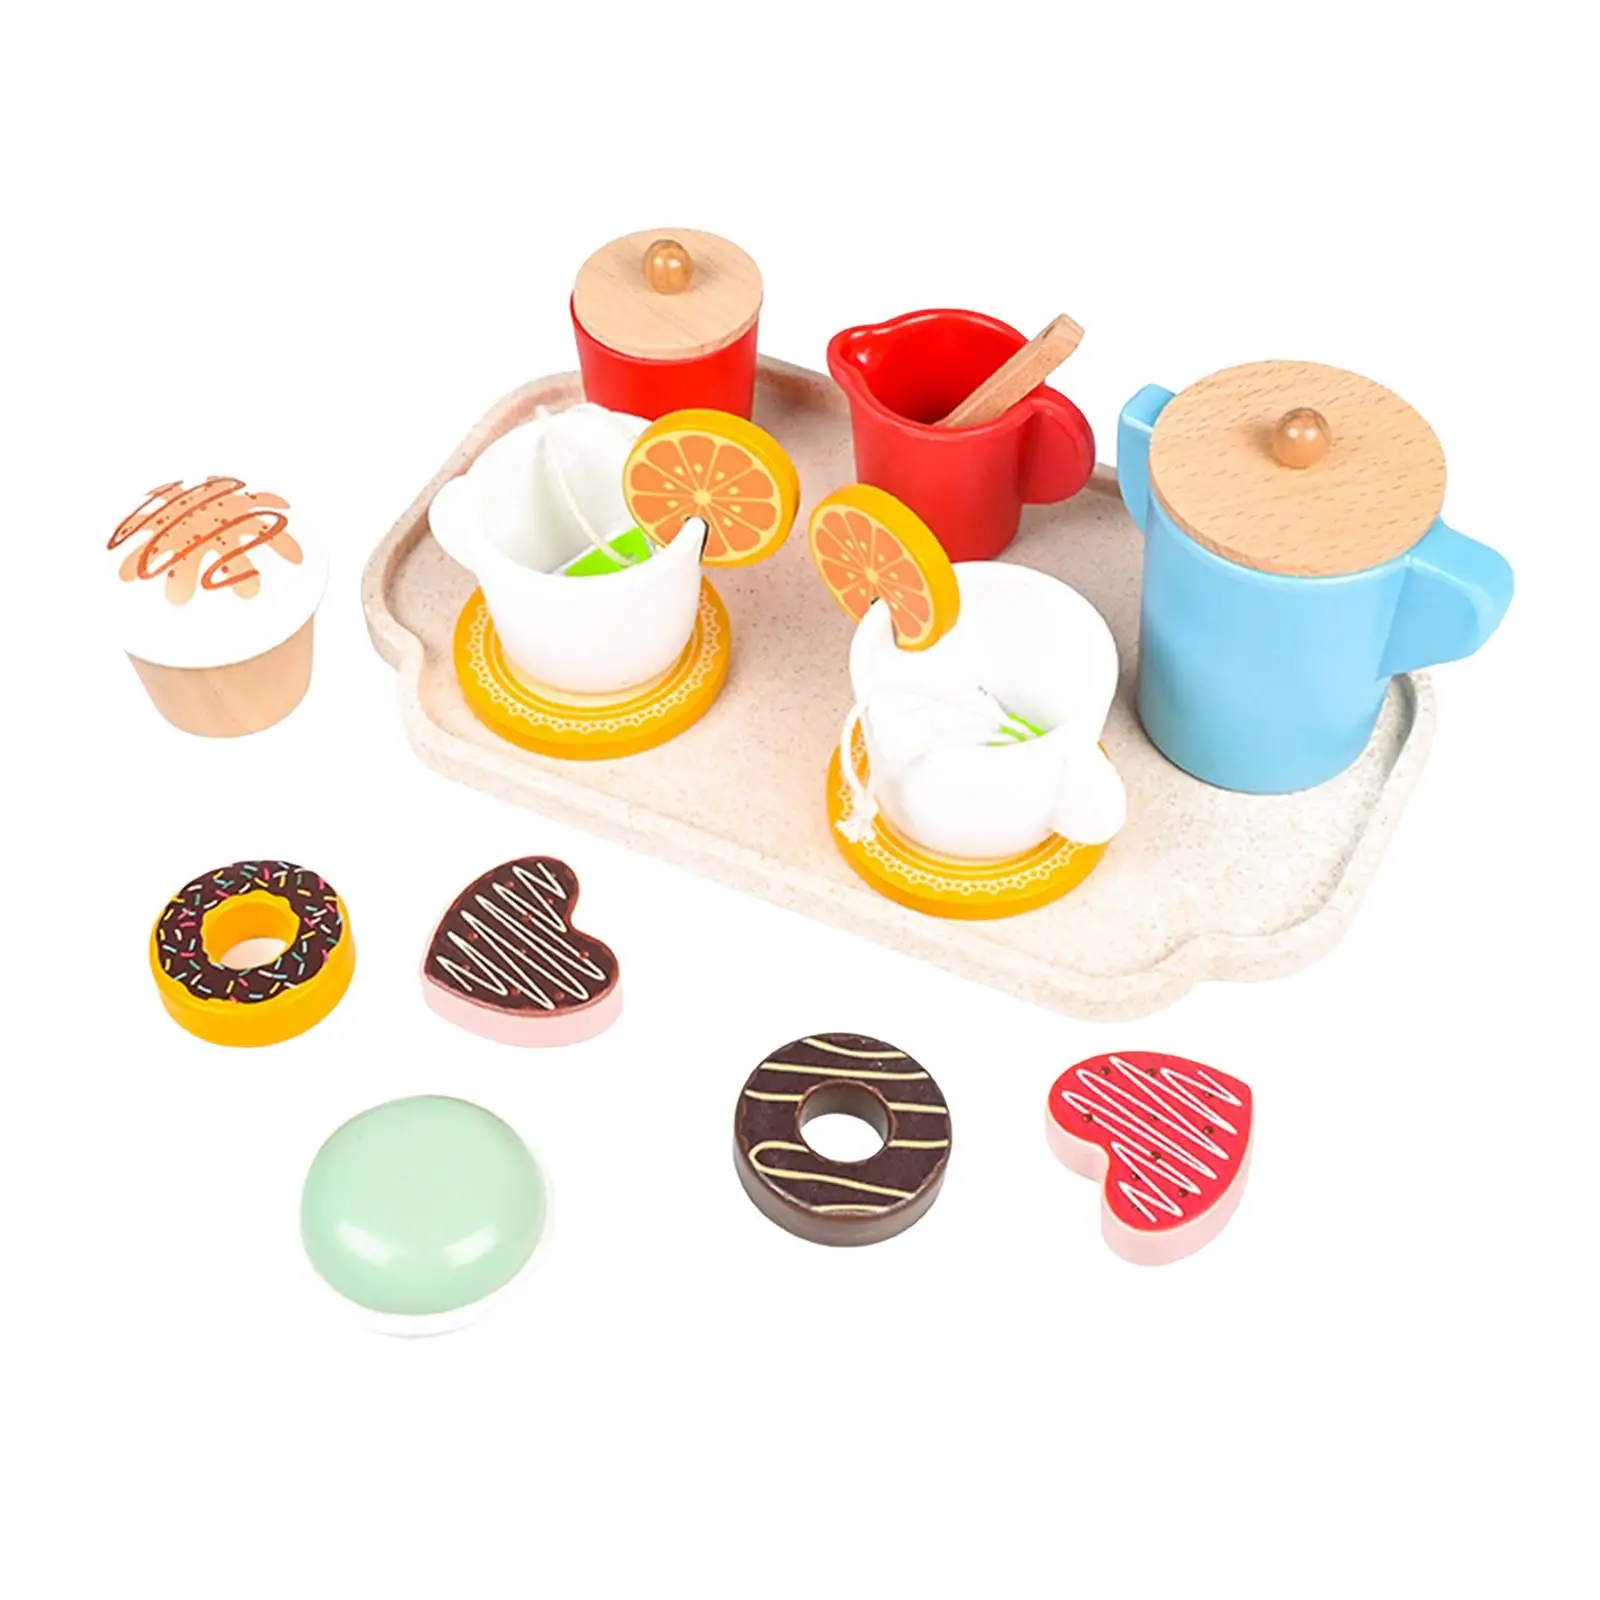 

12 Pieces Tea Party Early Educational with Teapot Coaster Coffee Mugs Spoons Saucers Kitchen Tableware Set for Kids Party Favors